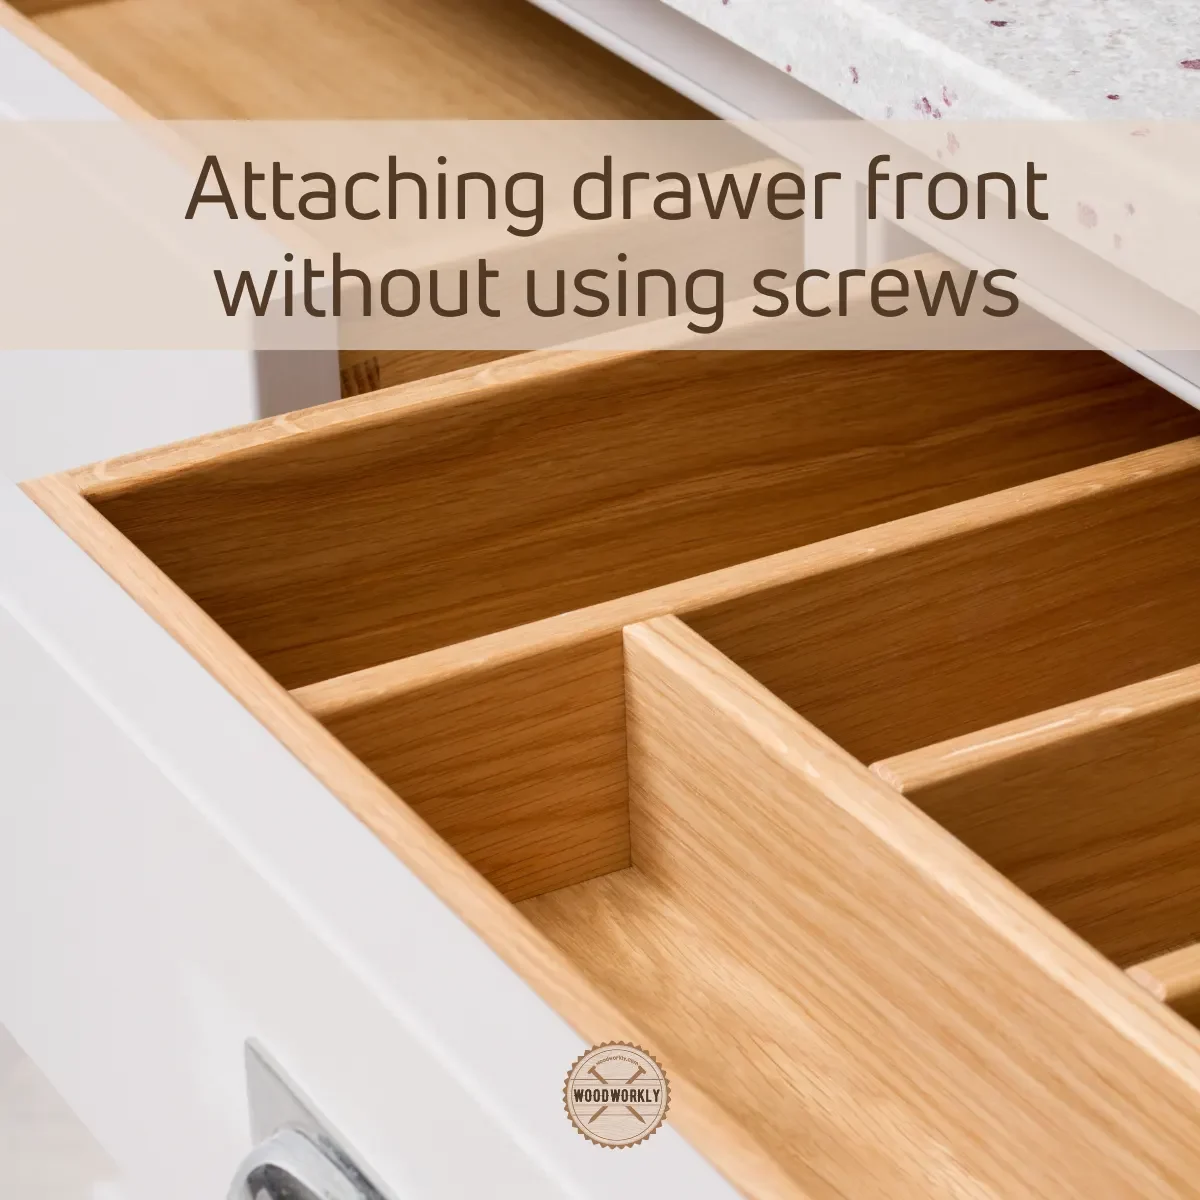 Attaching drawer front without using screws